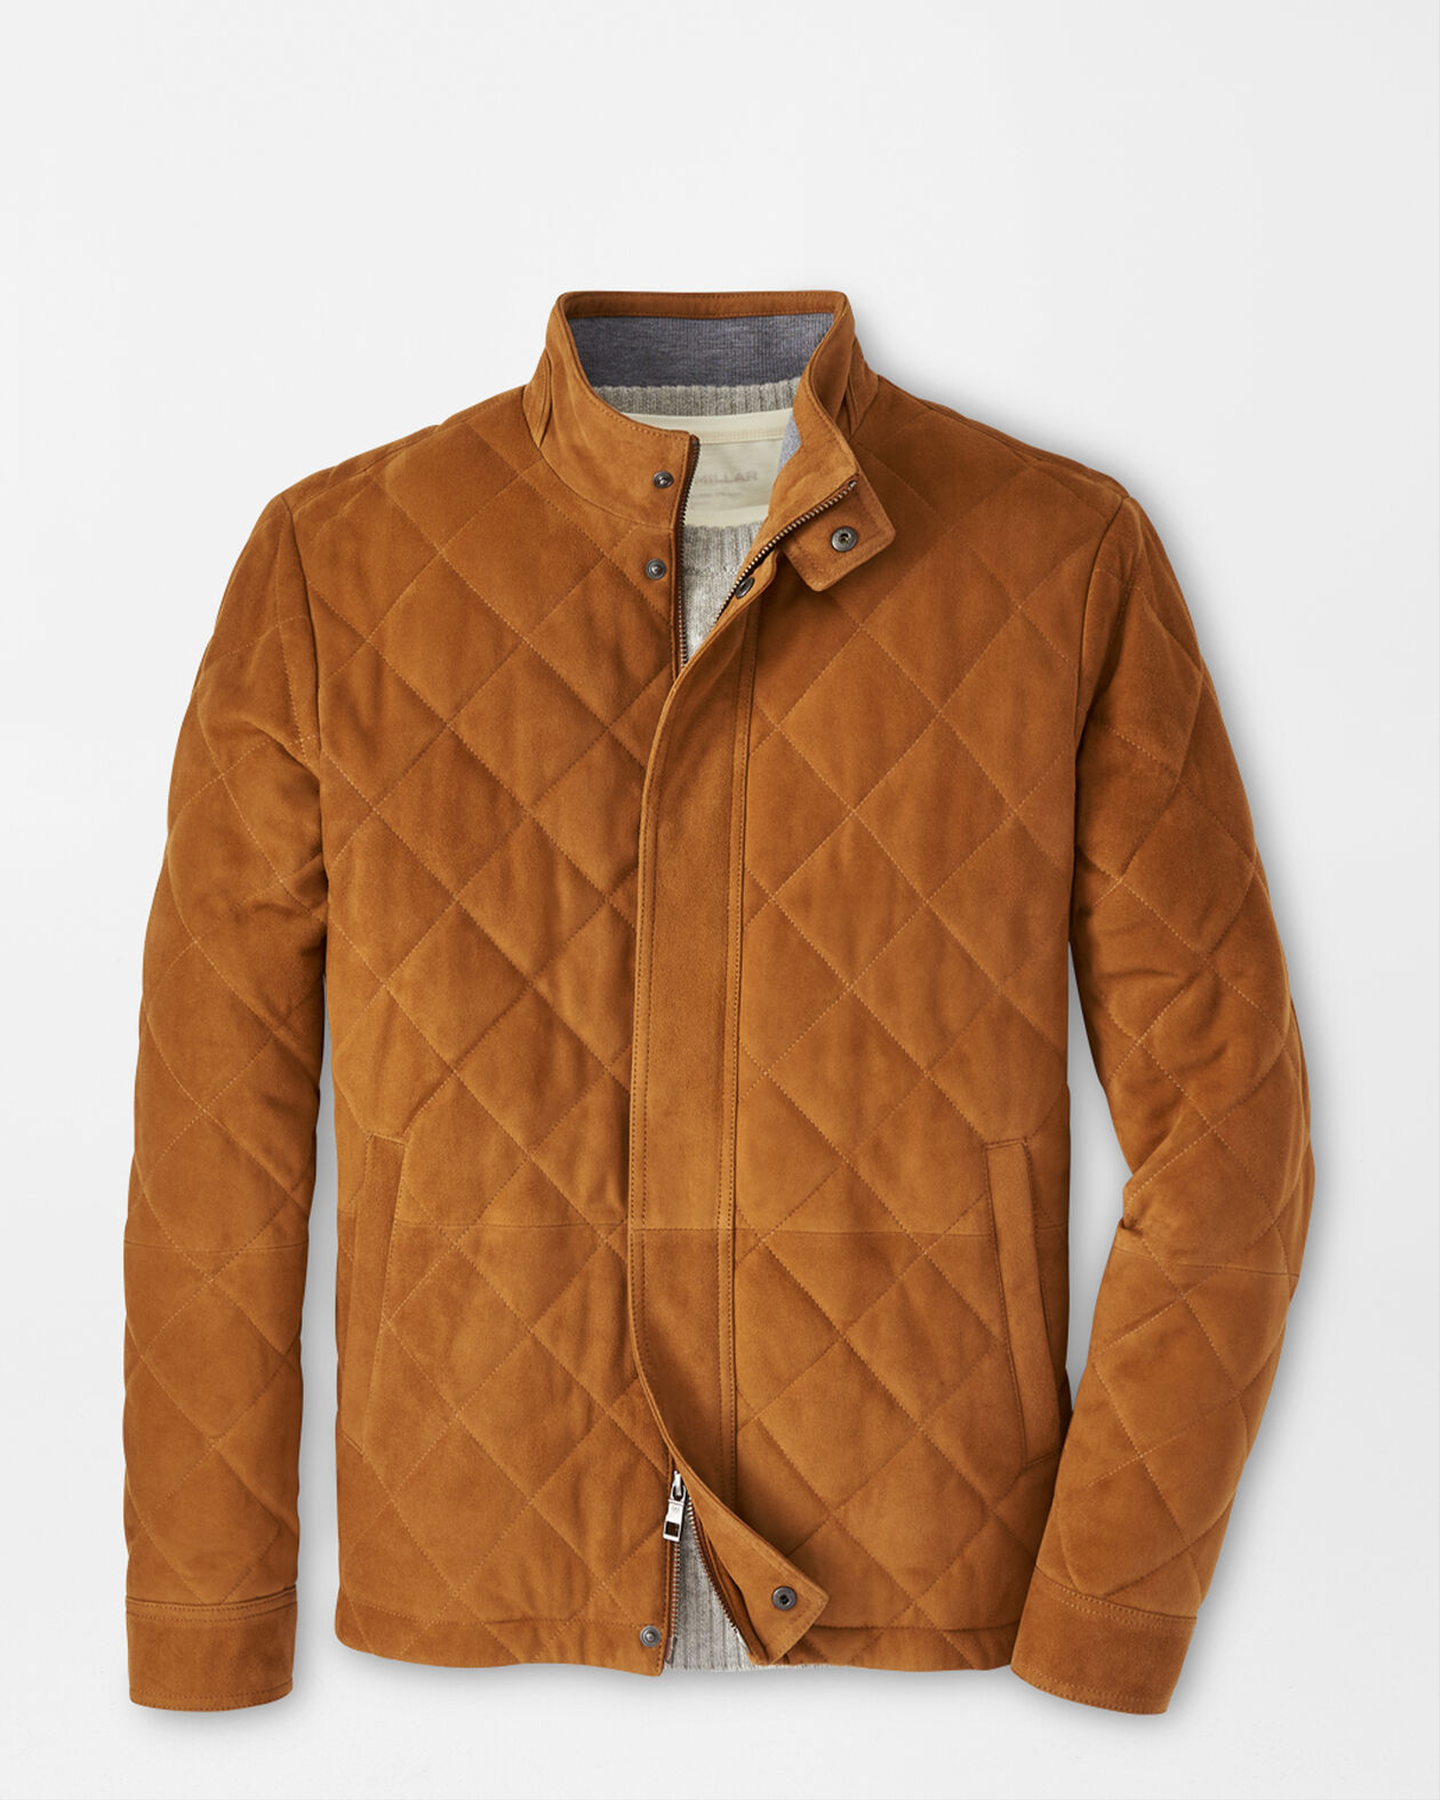 SUEDE NORFOLK QUILTED BOMBER JACKET - WHISKEY